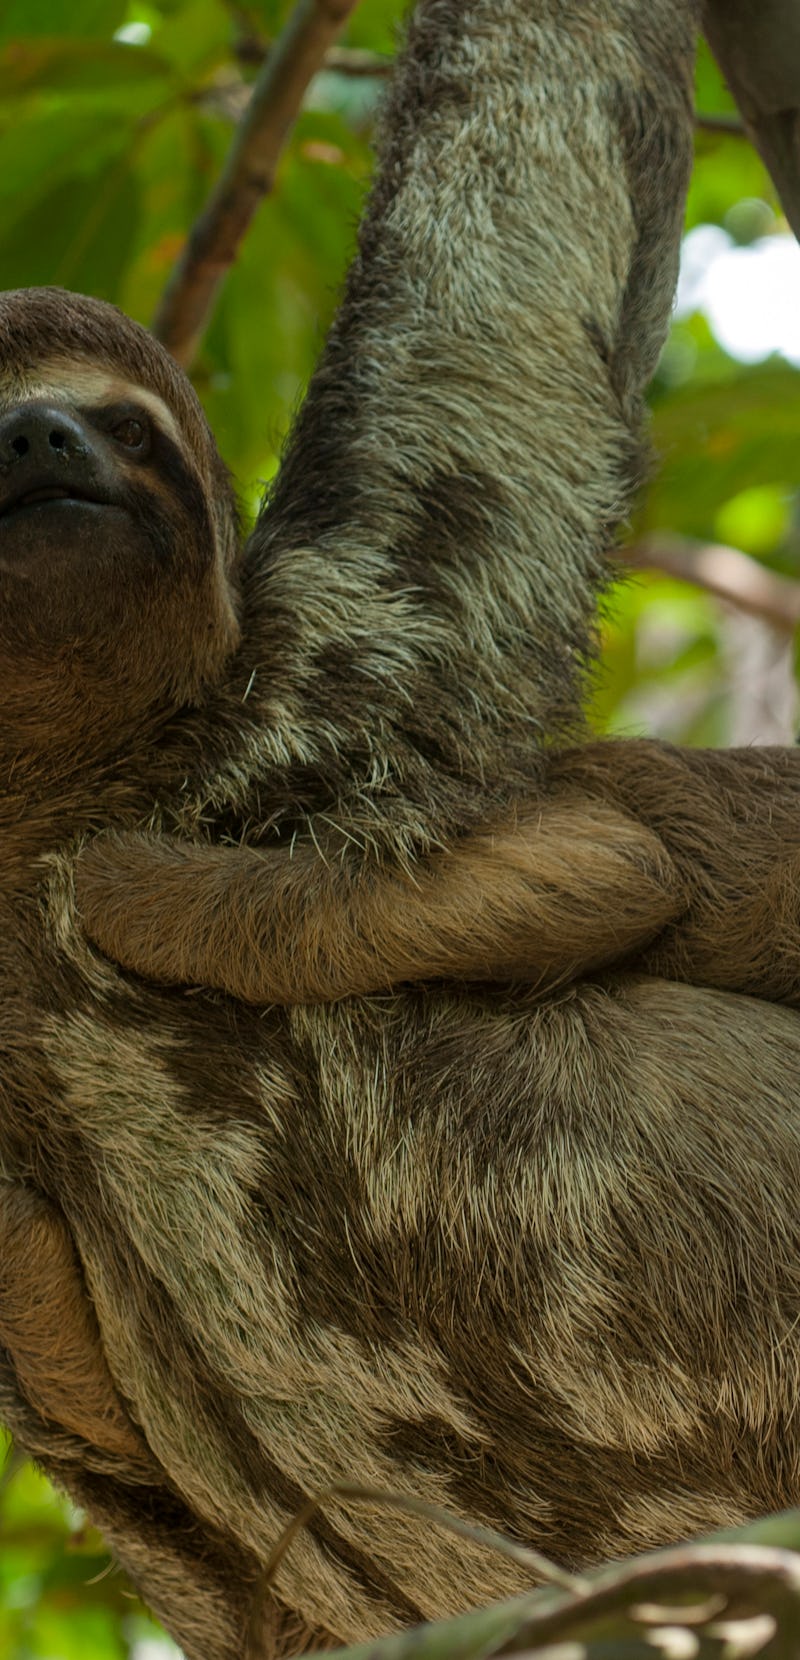 A sloth sitting on a high tree branch